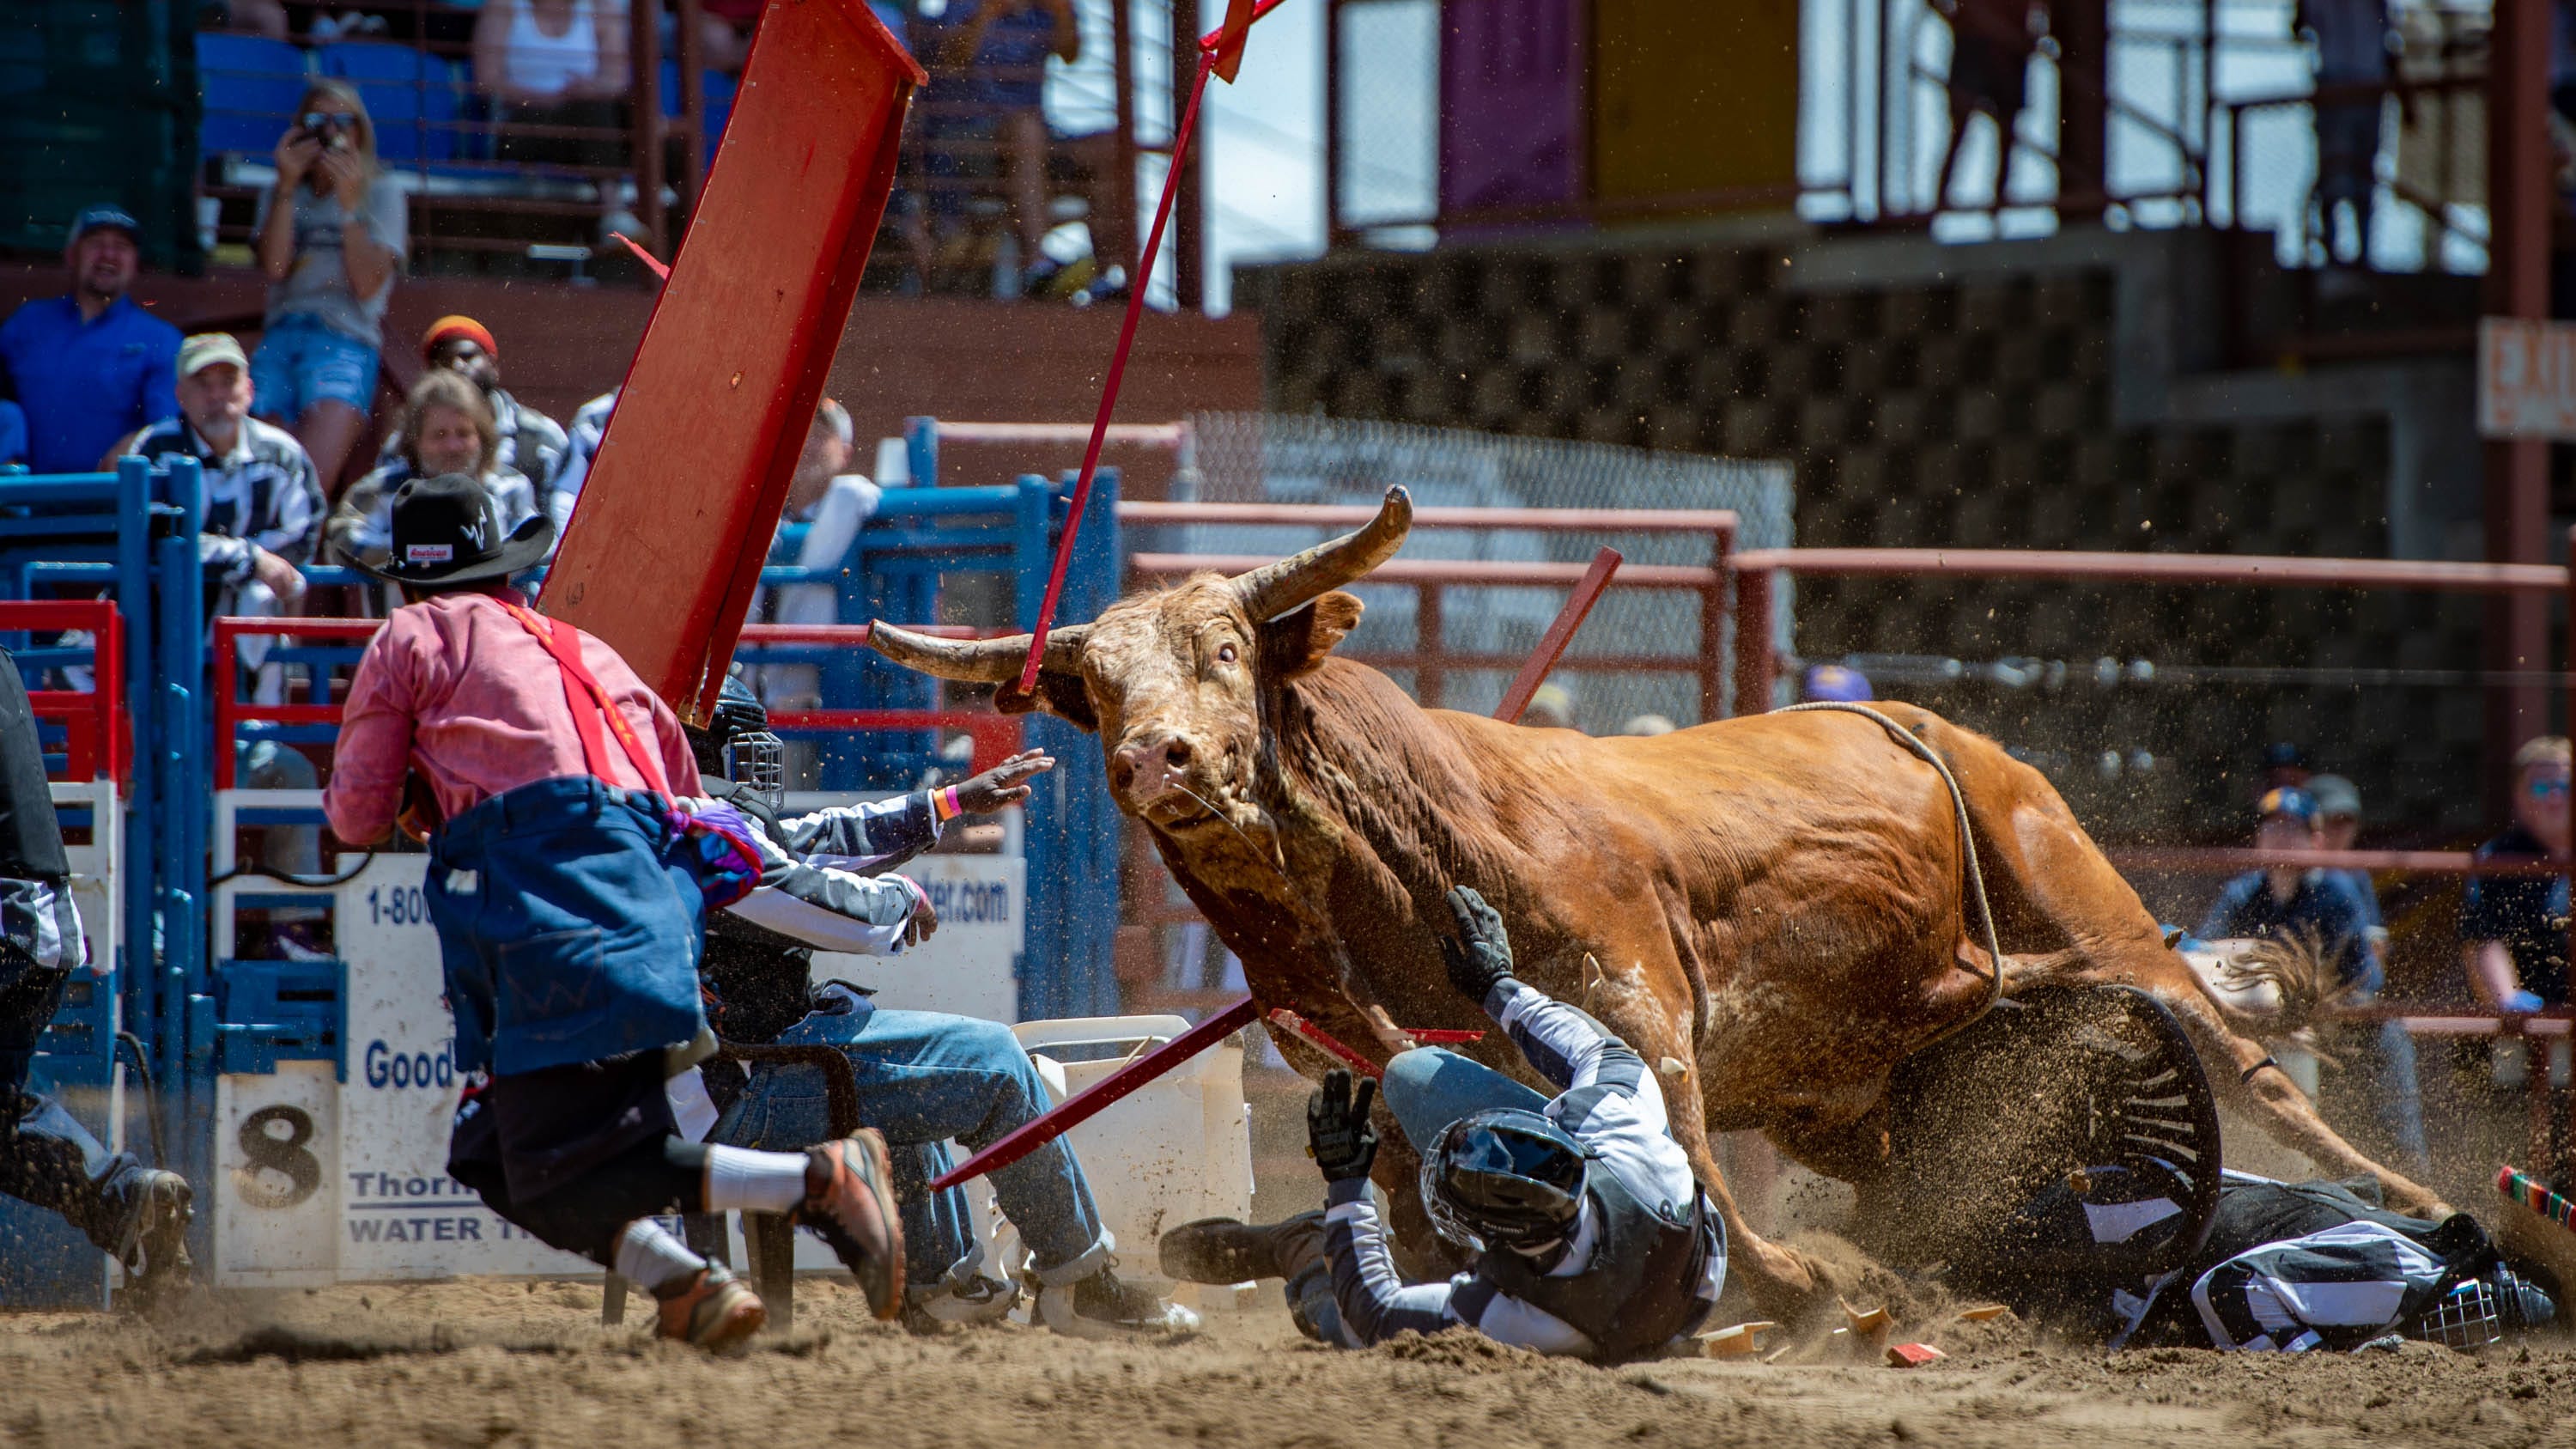 Angola Prison Rodeo returns in 2022 to soldout crowd